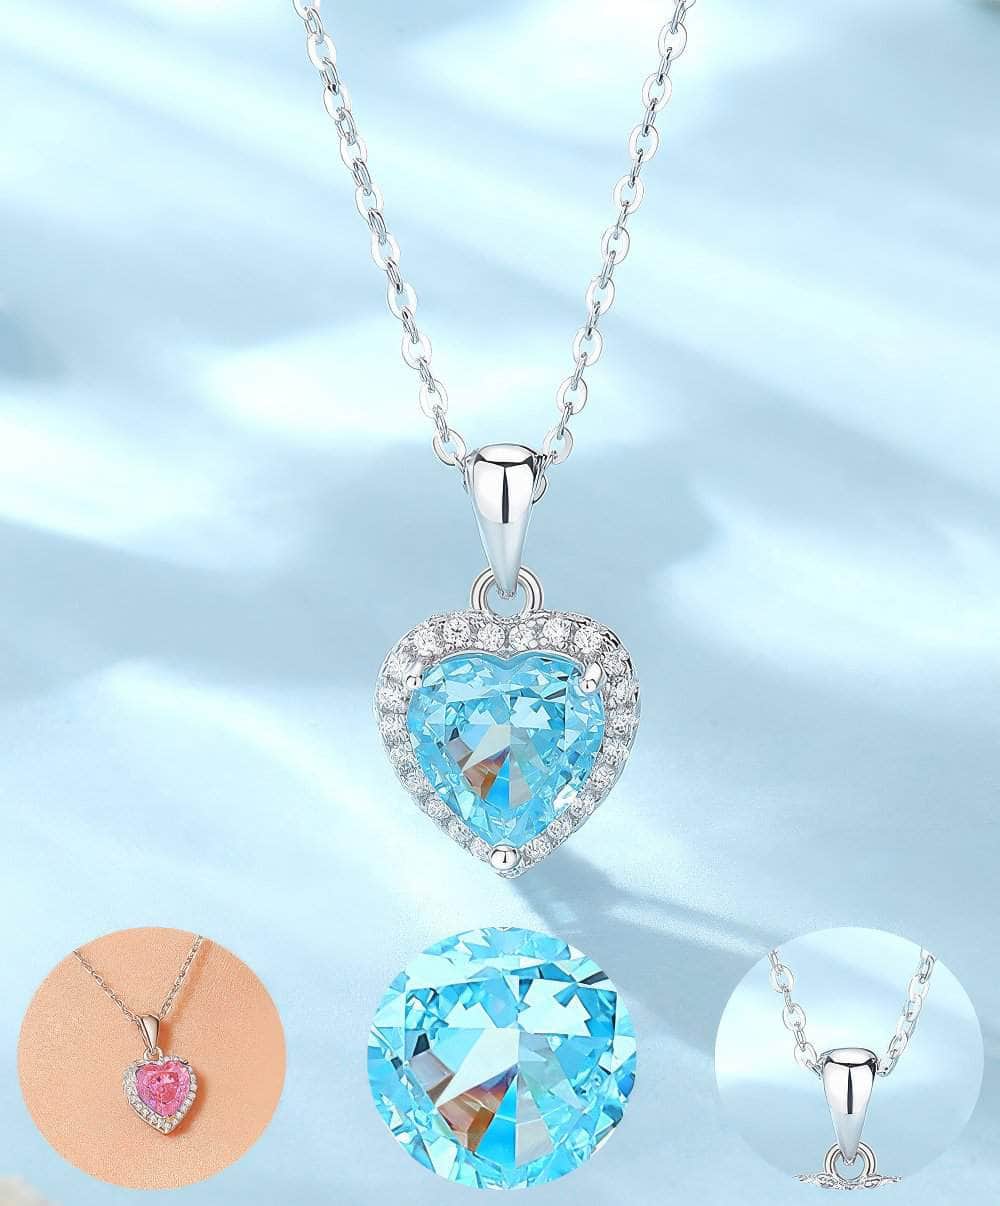 S925 Sterling Silver Heart-Shaped Paved Lab Grown Diamond Blue Topaz Necklace